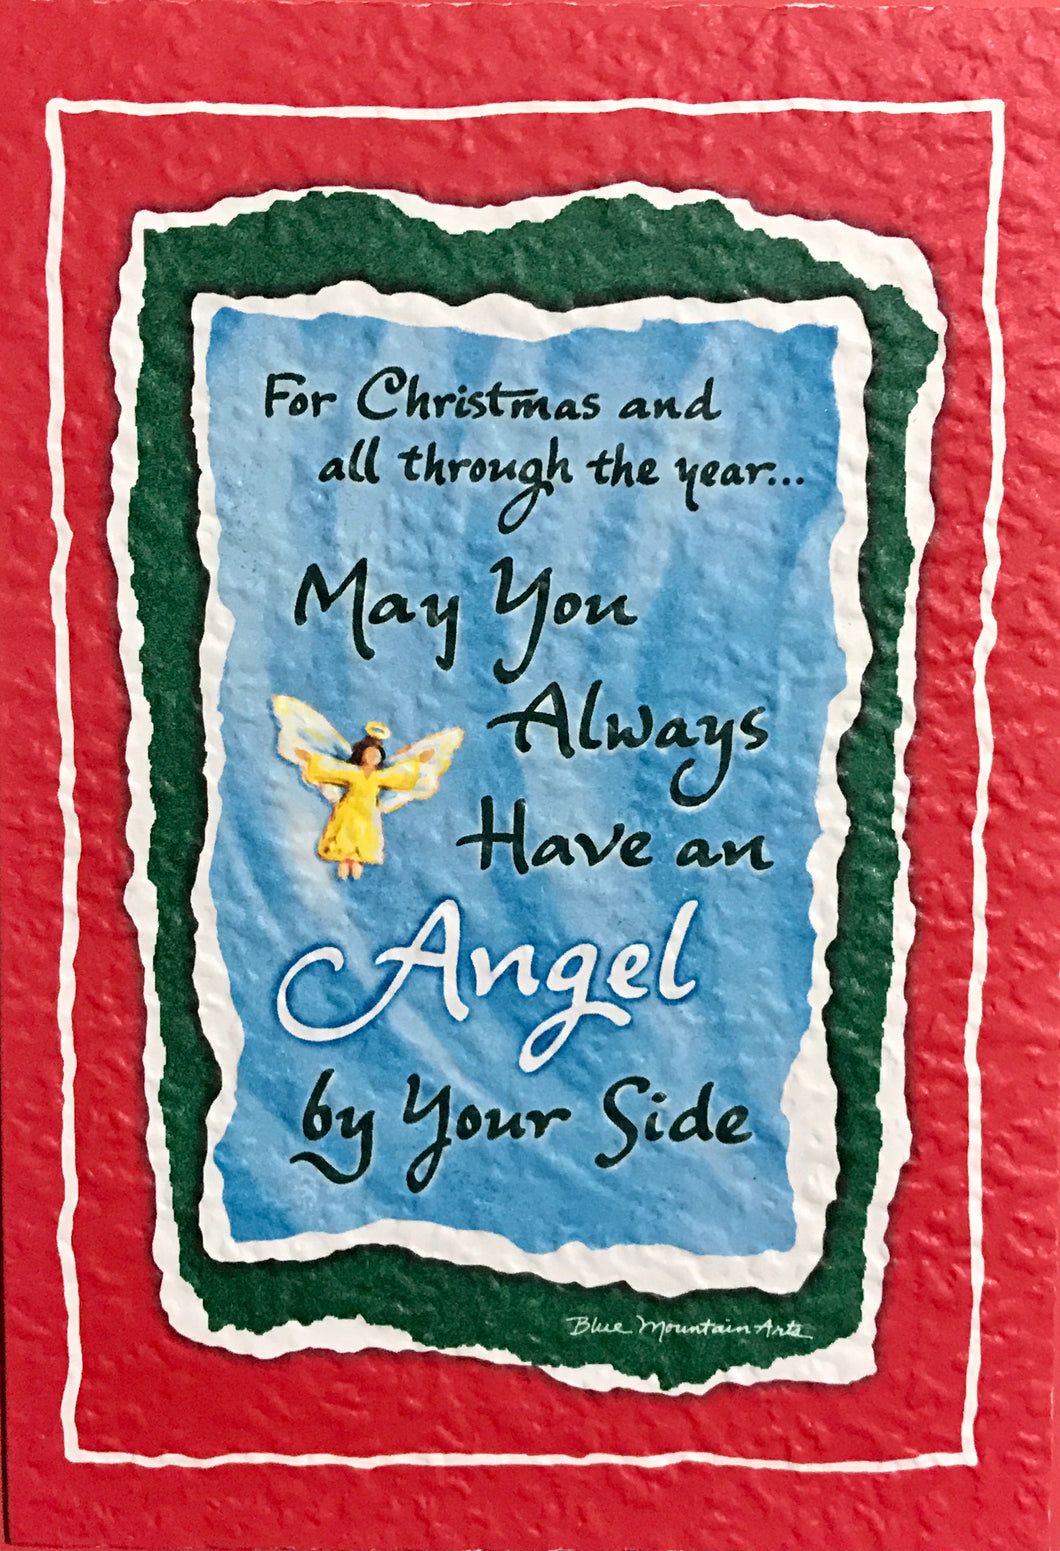 May You Always Have an Angel by Your Side